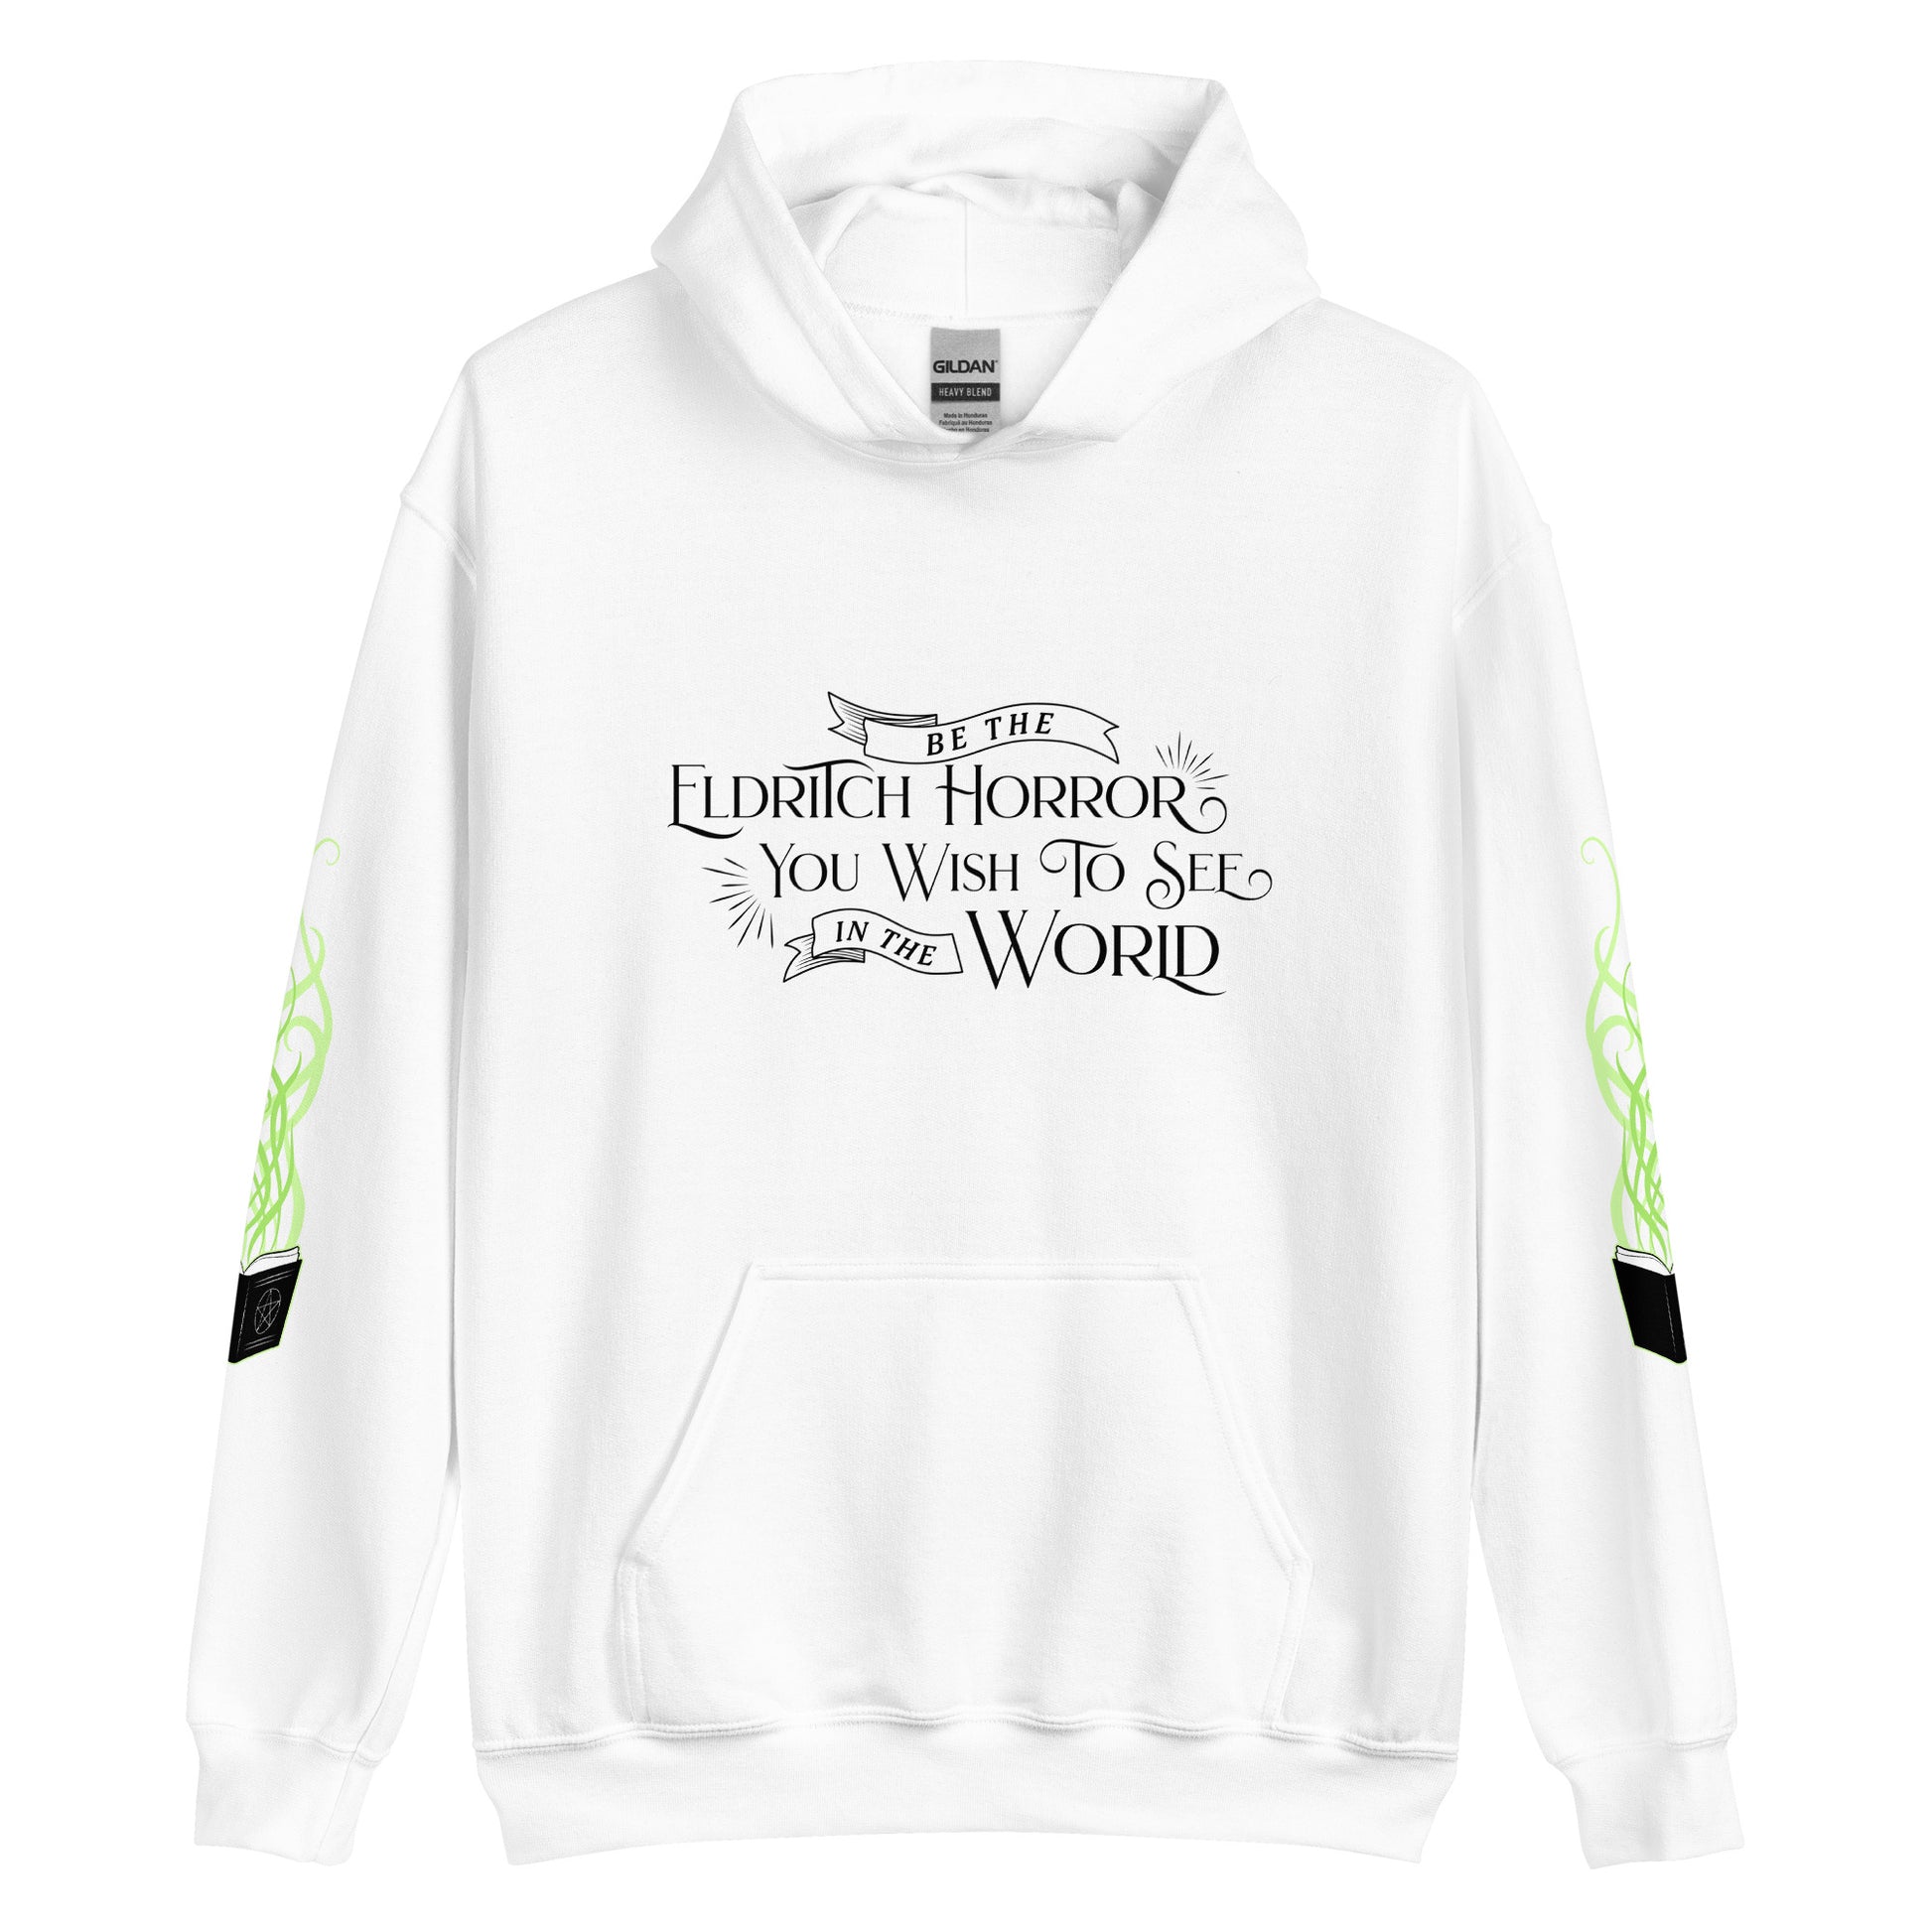 A white hooded sweatshirt featuring black text in an old-fashioned style on the chest. The text reads "Be the Eldritch Horror You Wish To See In The World". On each sleeve is an illustration of a black spellbook with green magical tendrils reaching upward from the pages.